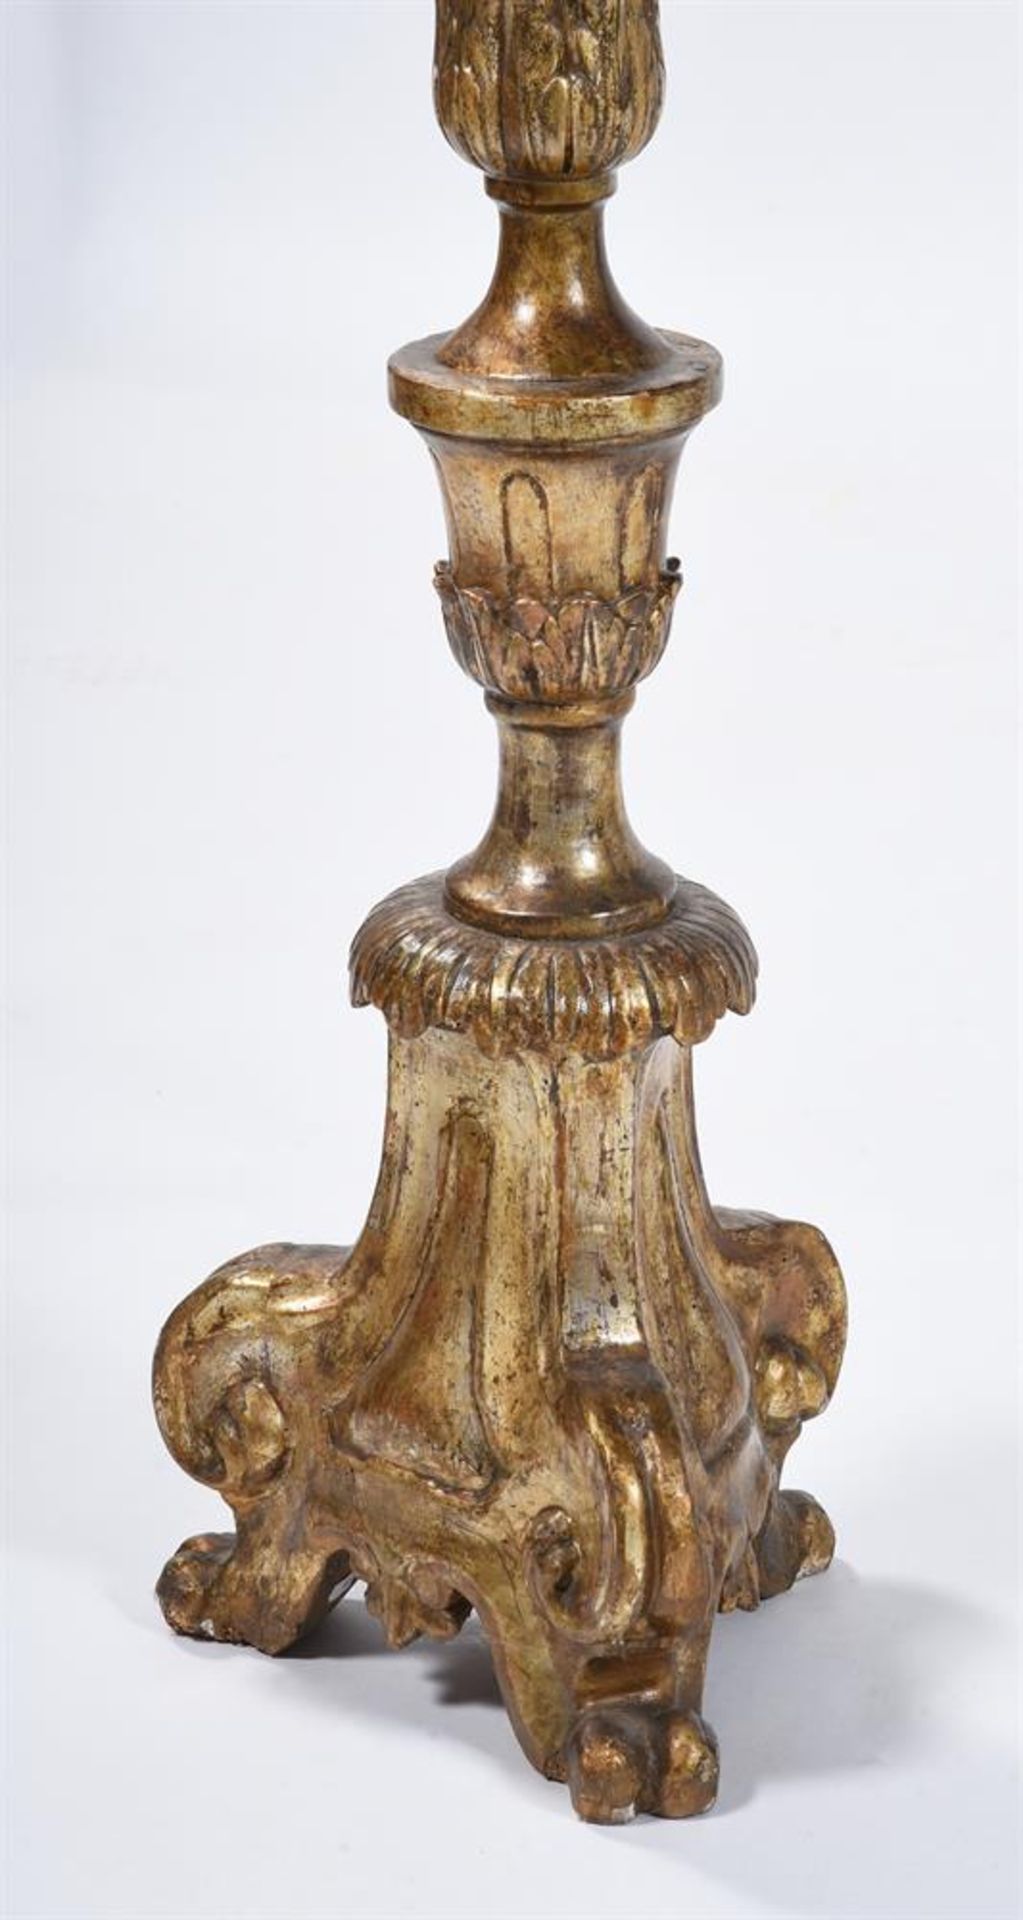 A PAIR OF ITALIAN GILTWOOD ALTAR CANDLESTICKS, 18TH CENTURY - Image 3 of 3